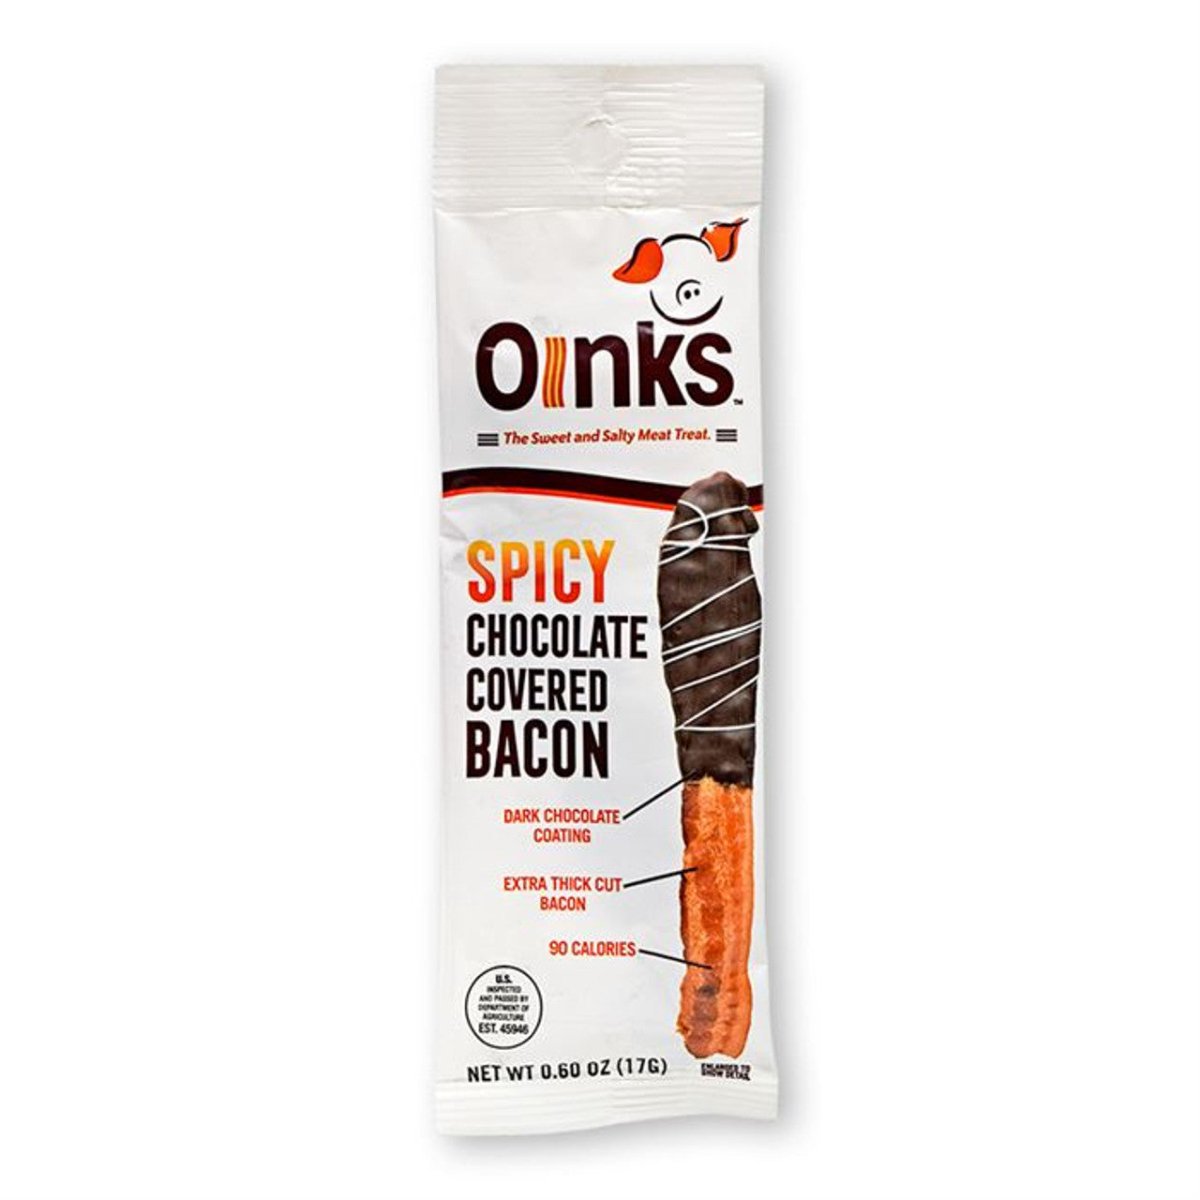 Oinks Chocolate Spicy Covered Bacon 17g - Candy Mail UK